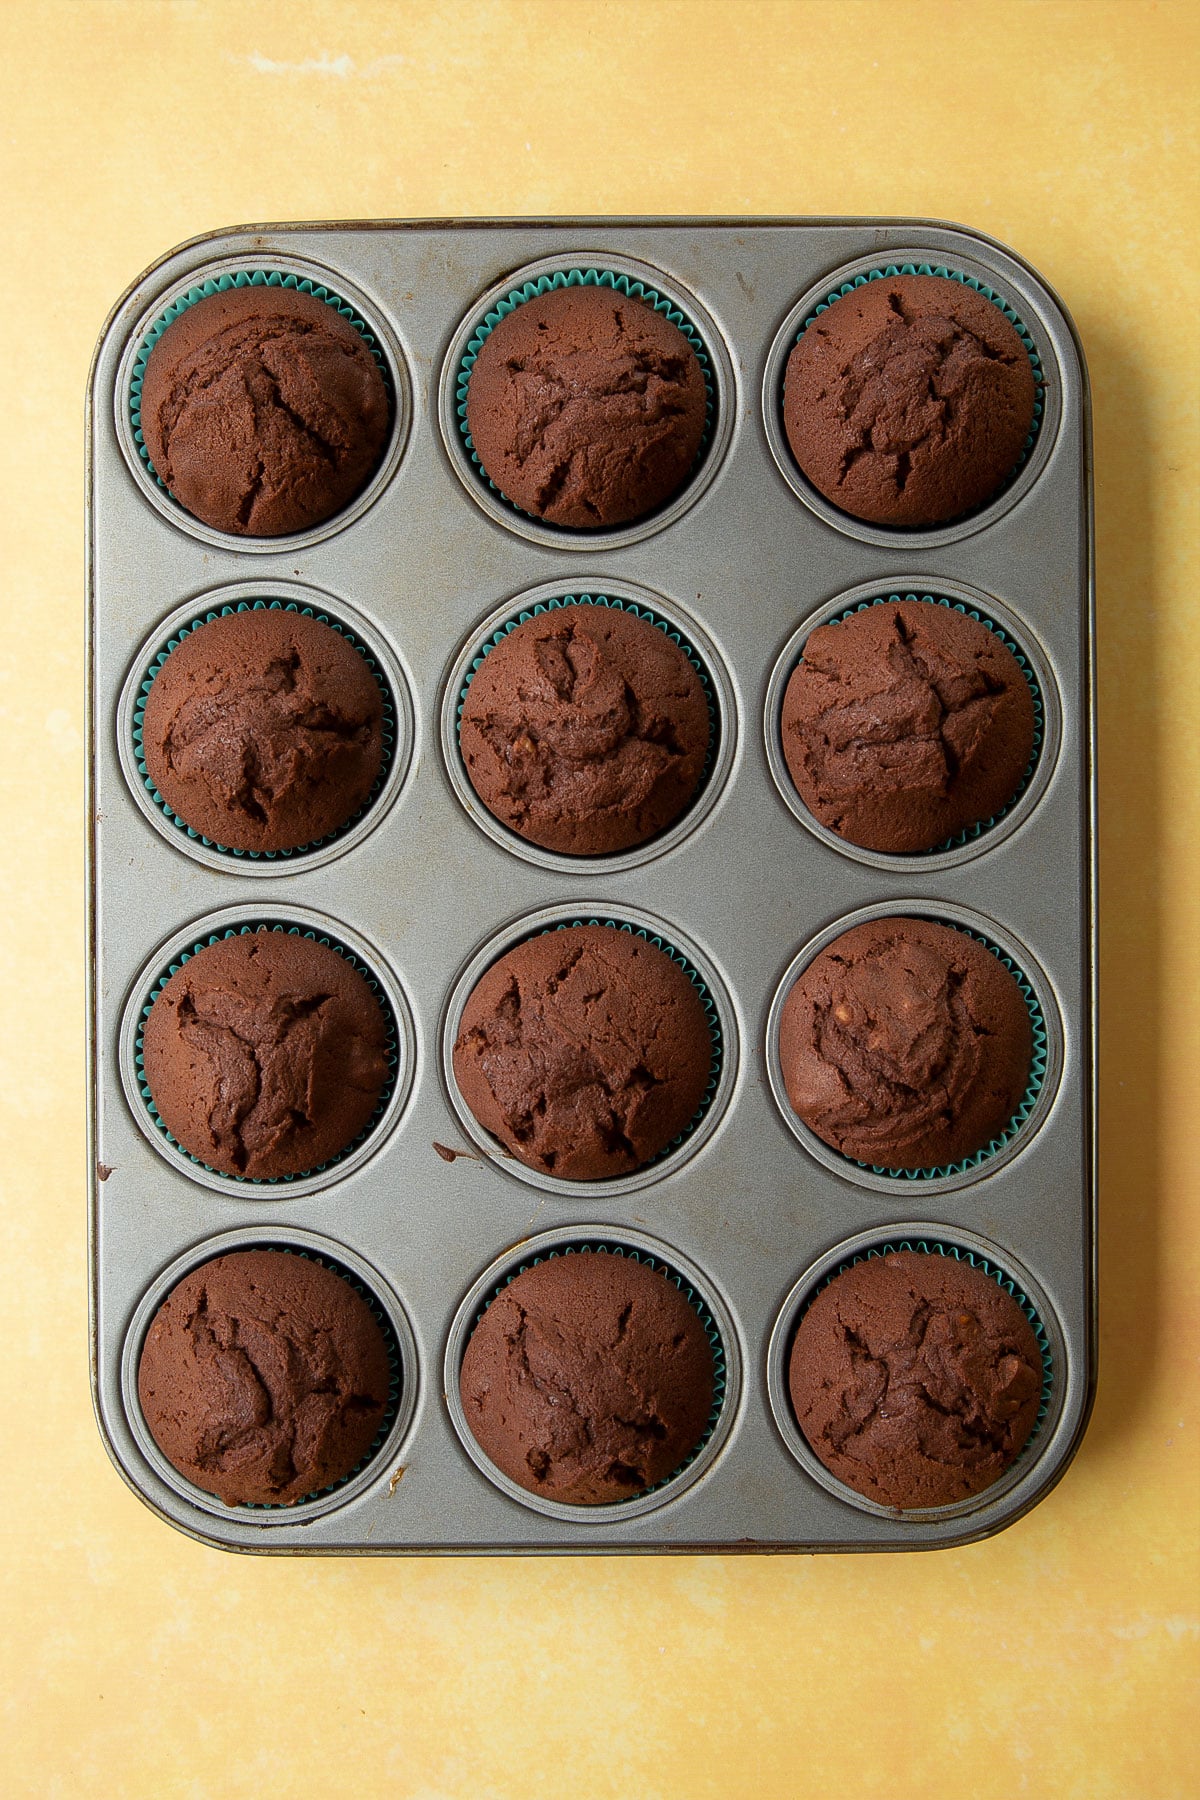 Chocolate walnut cupcakes freshly baked in a muffin tray. 